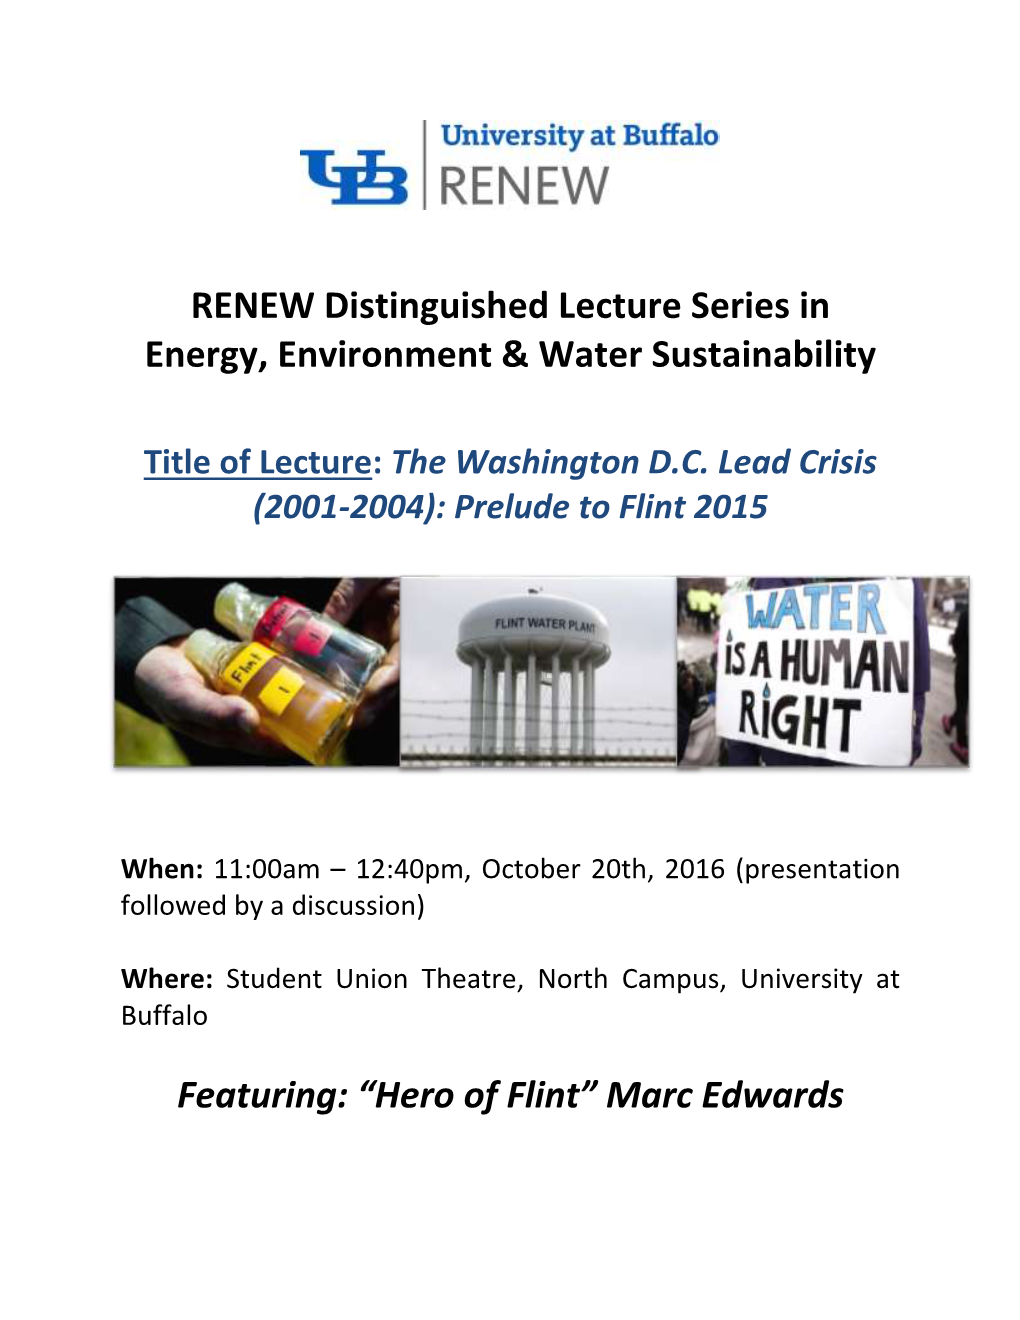 RENEW Distinguished Lecture Series in Energy, Environment & Water Sustainability